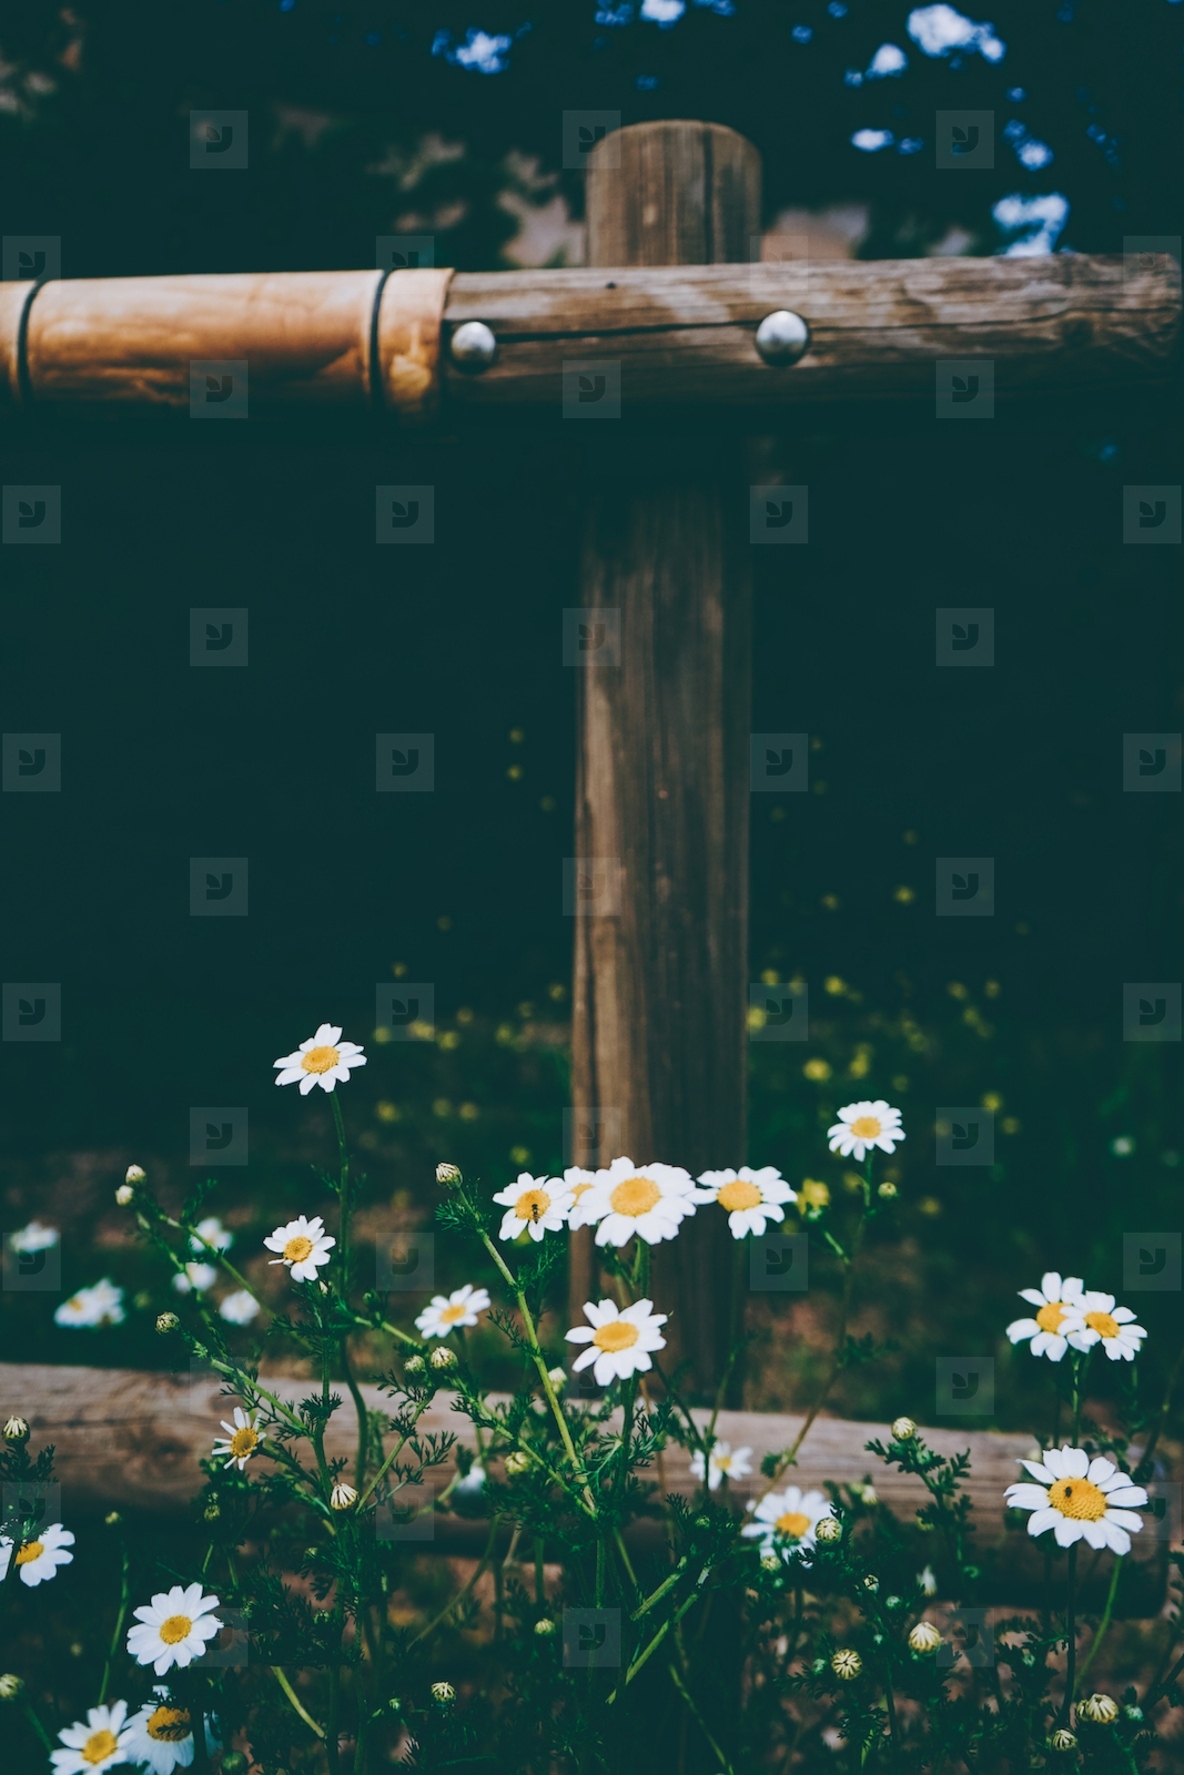 Beautiful image about rustic details of flowers and wood